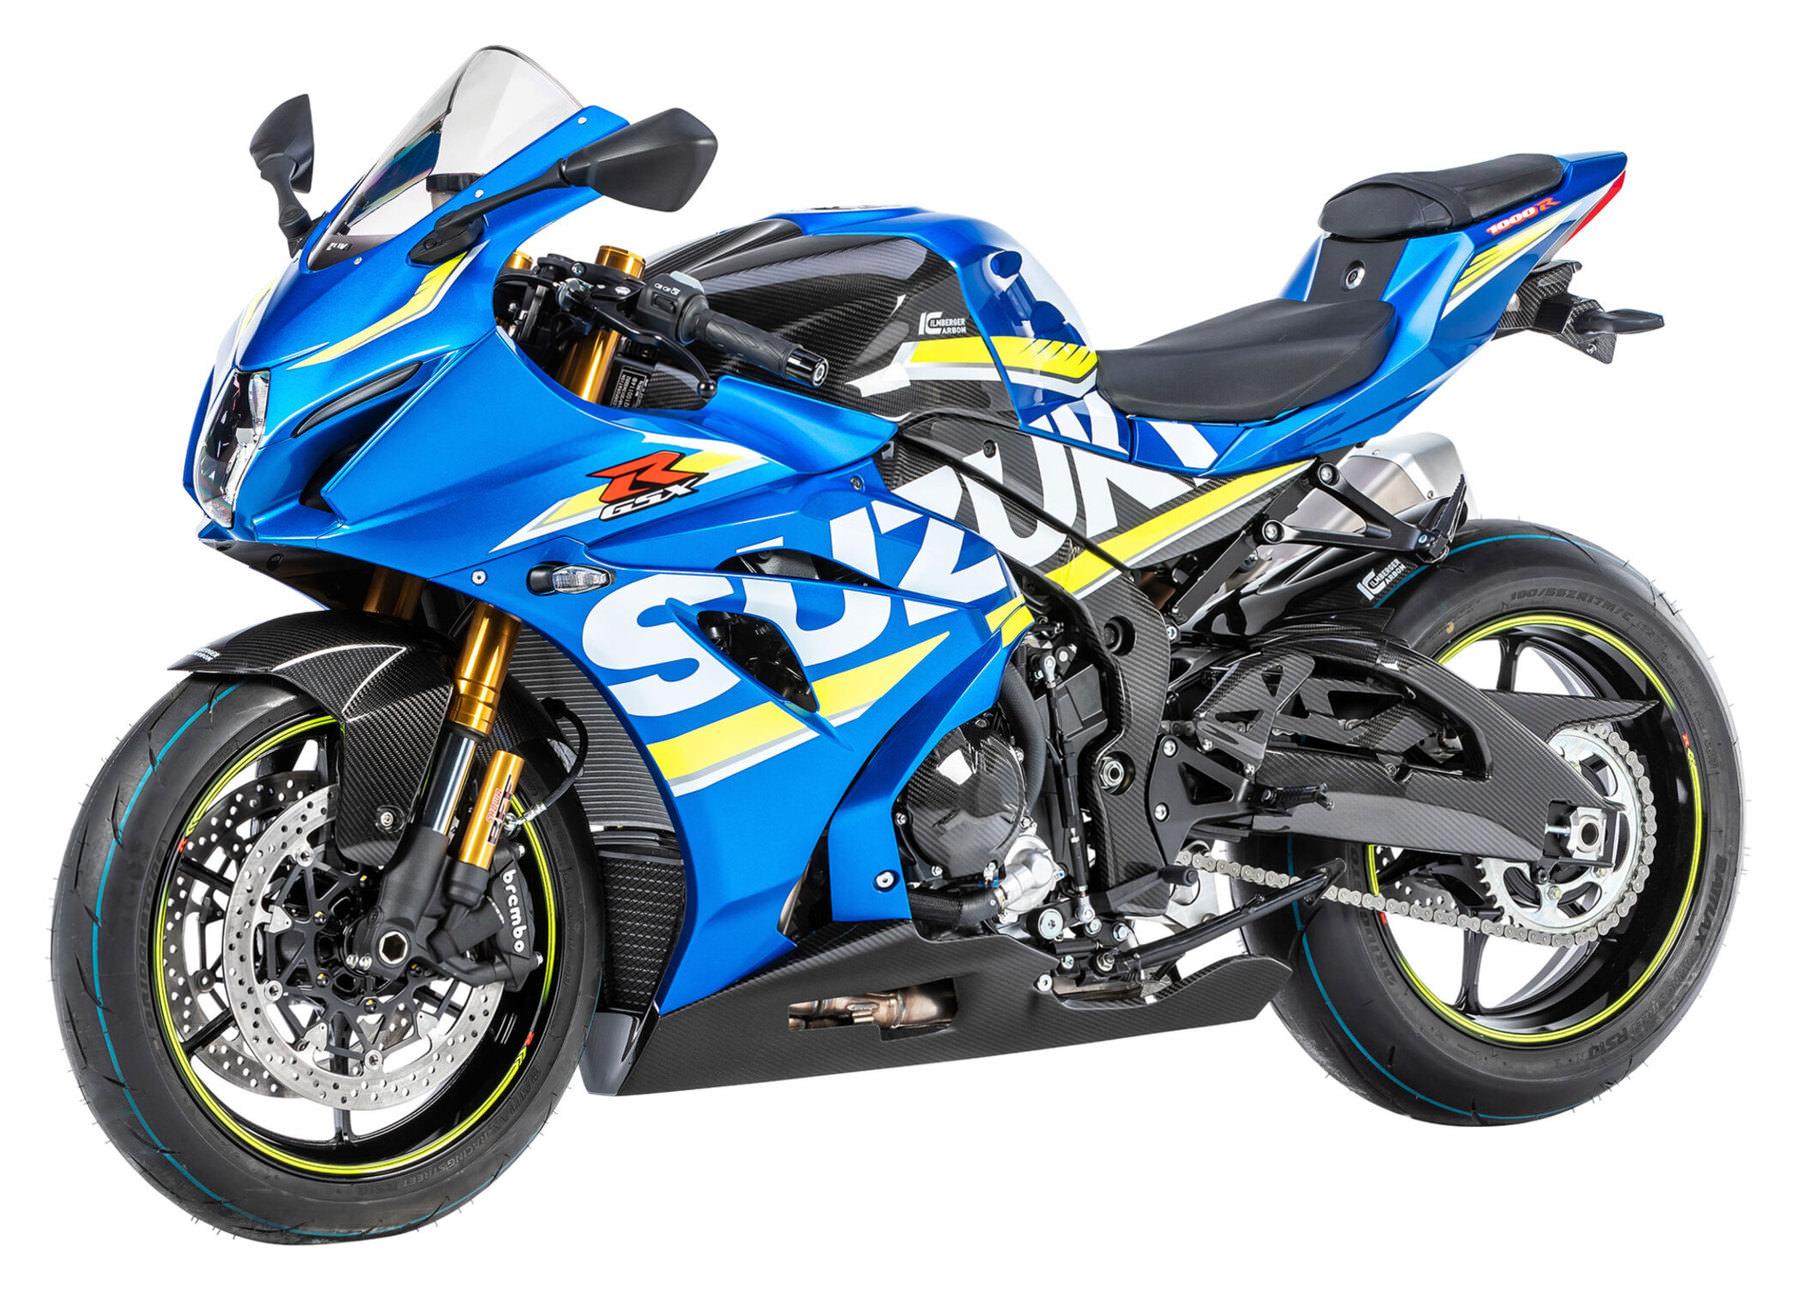 Buy Carbon parts for Suzuki GSX-R1000/R 17- | Louis motorcycle clothing